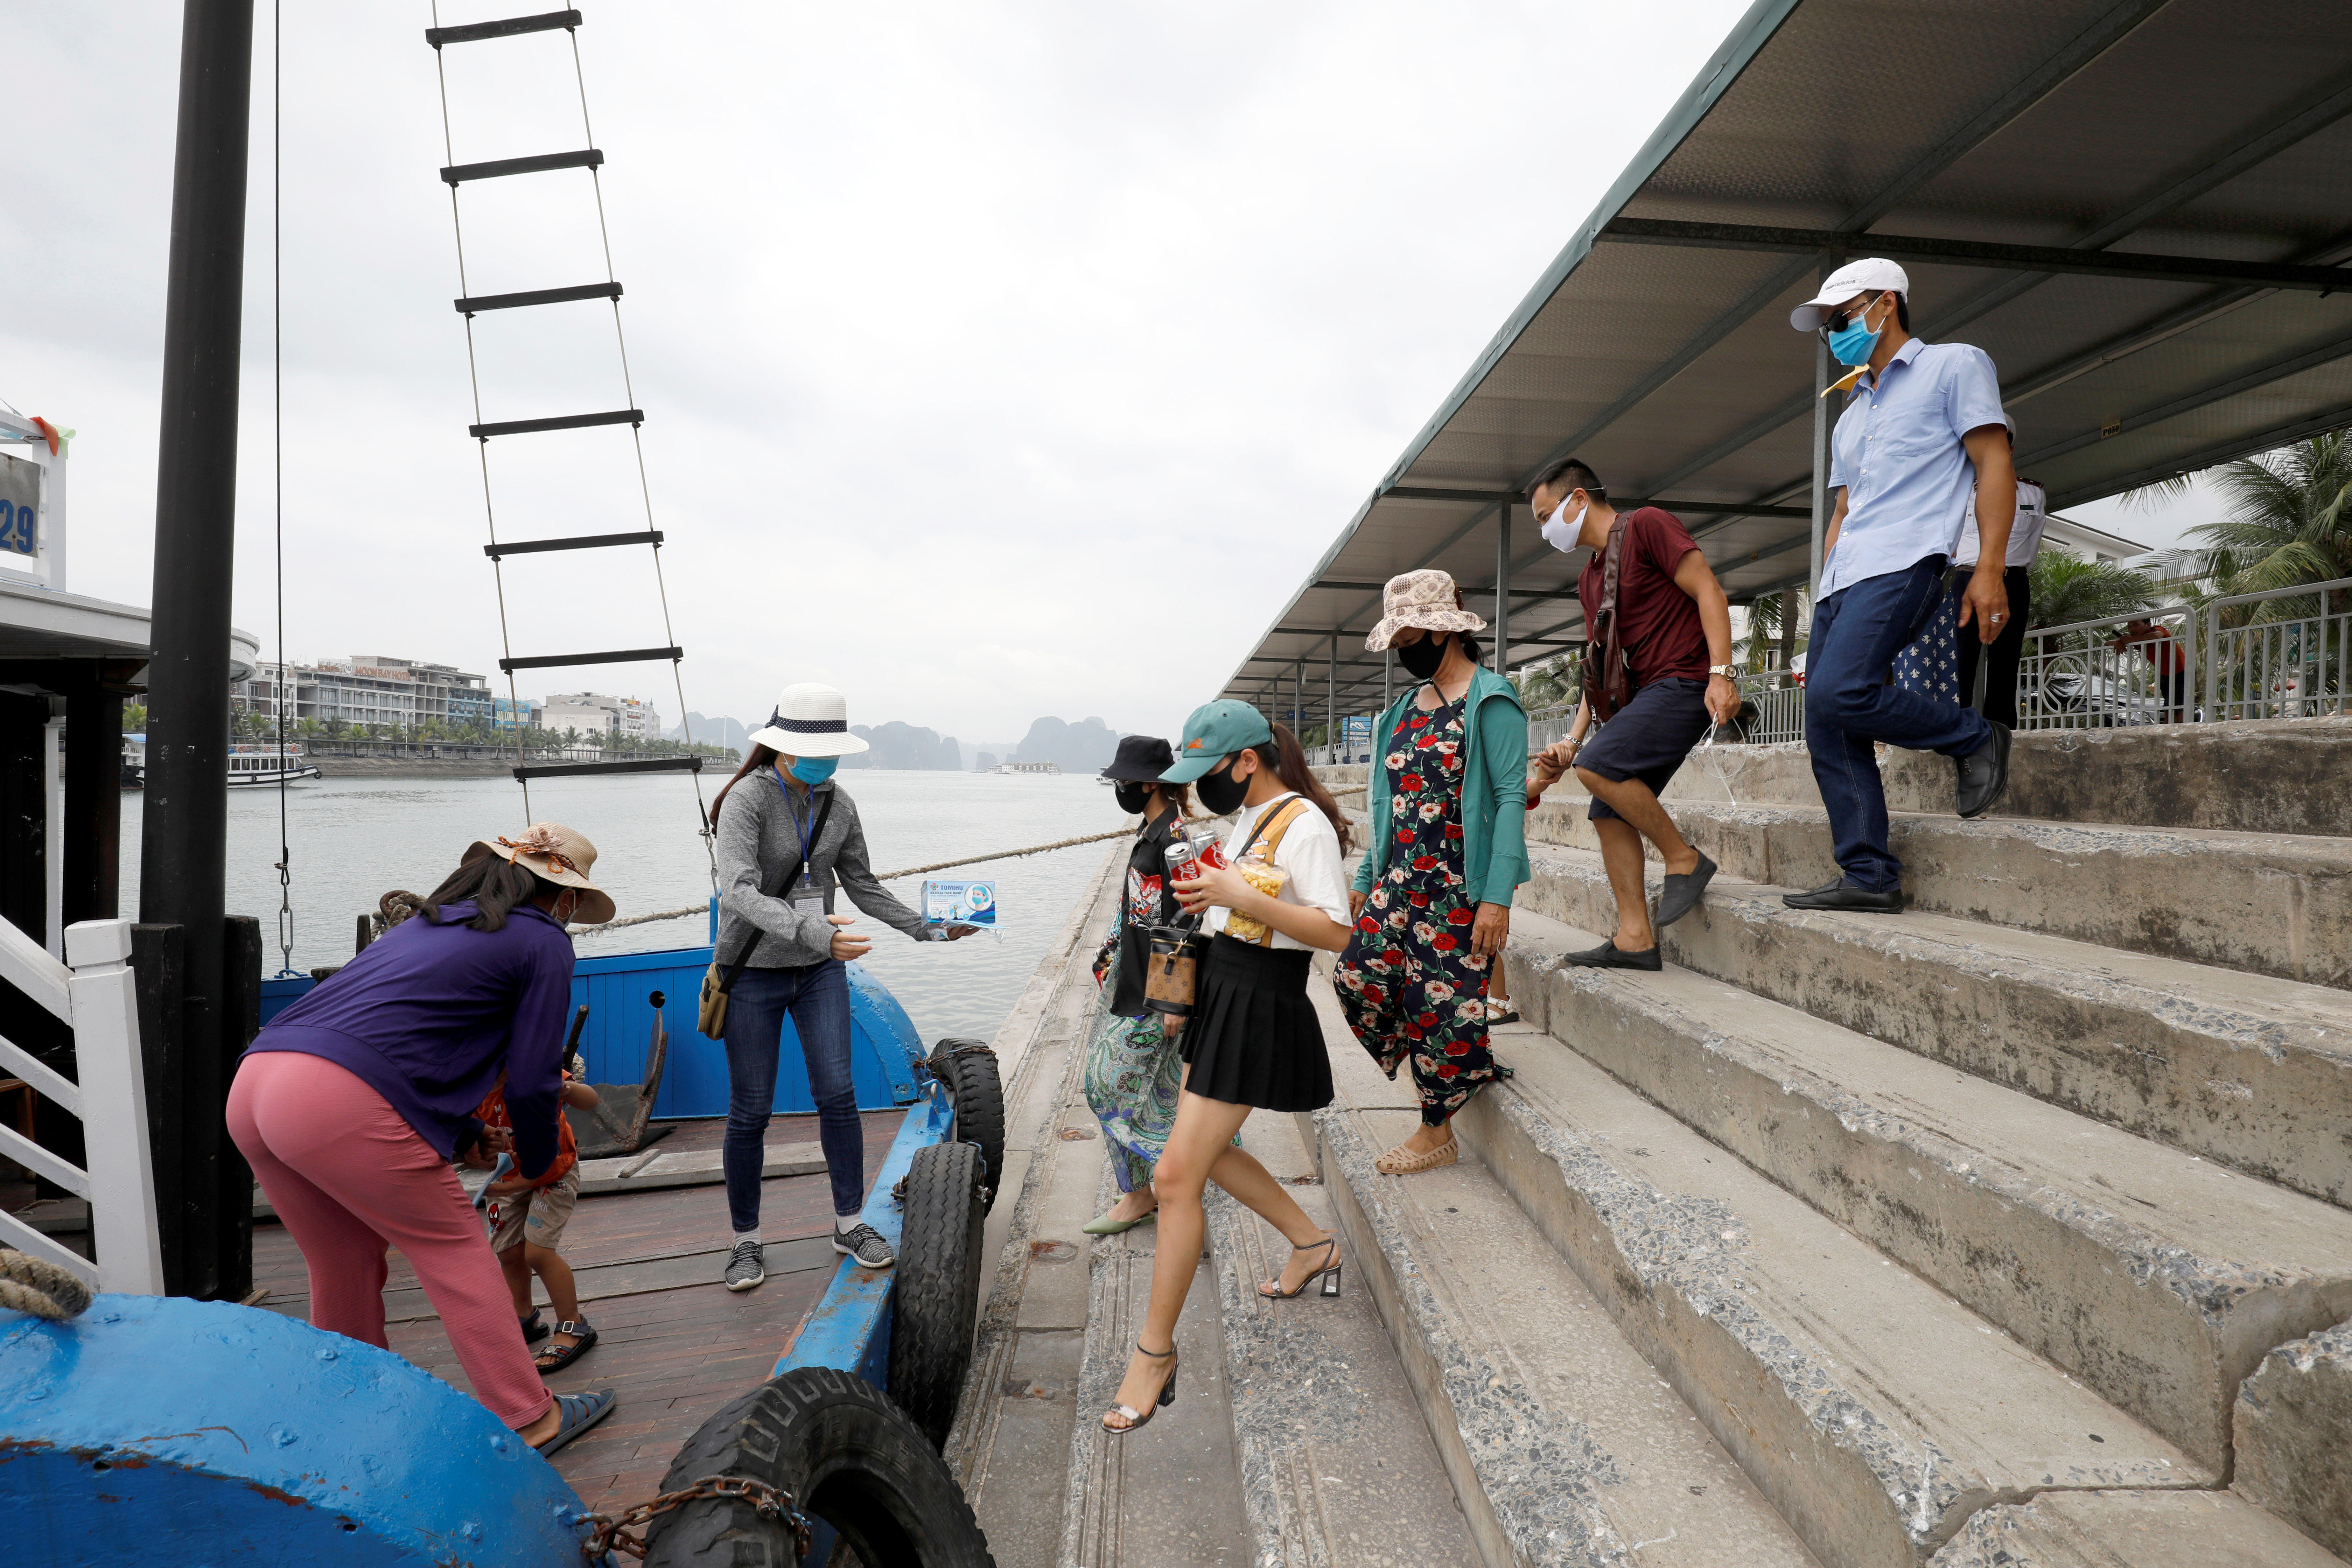 Vietnamese tourists visit Ha Long bay after the Vietnamese government eased the lockdown following the coronavirus disease (COVID-19) outbreak, in Quang Ninh province